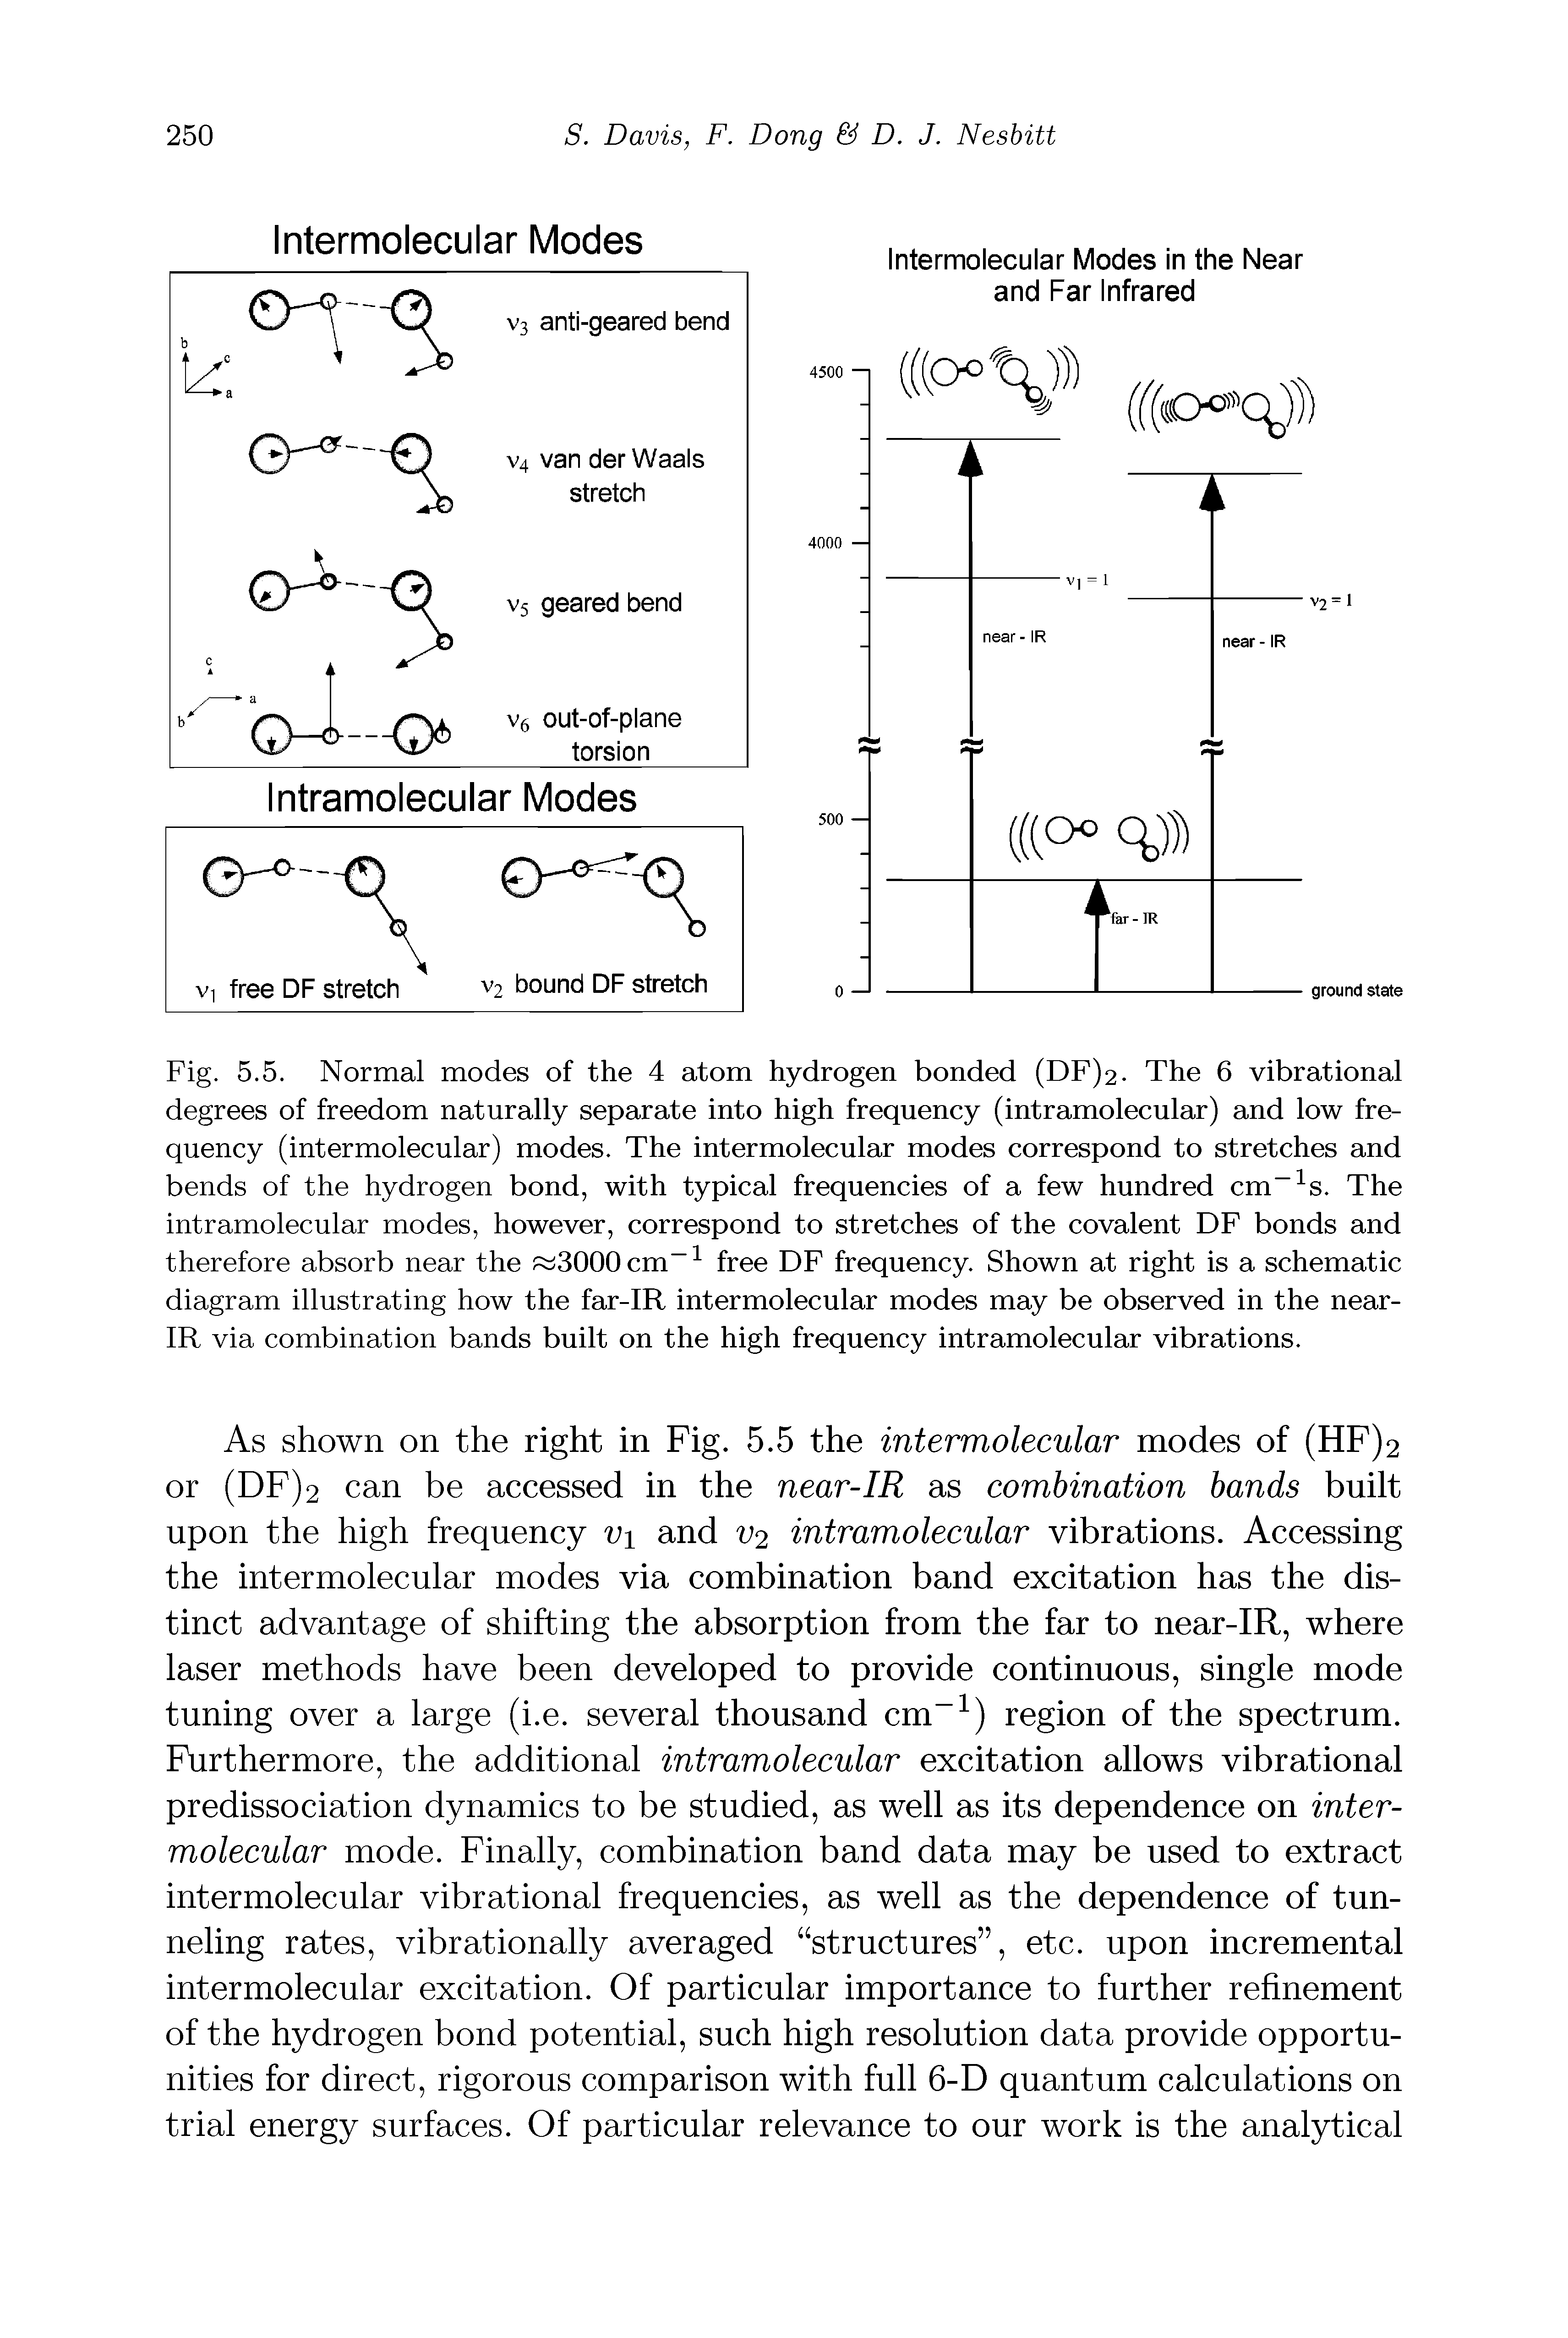 Fig. 5.5. Normal modes of the 4 atom hydrogen bonded (DF)2. The 6 vibrational degrees of freedom naturally separate into high frequency (intramolecular) and low frequency (intermolecular) modes. The intermolecular modes correspond to stretches and bends of the hydrogen bond, with typical frequencies of a few hundred cm s. The intramolecular modes, however, correspond to stretches of the covalent DF bonds and therefore absorb near the 3000cm free DF frequency. Shown at right is a schematic diagram illustrating how the far-IR intermolecular modes may be observed in the near-IR via combination bands built on the high frequency intramolecular vibrations.